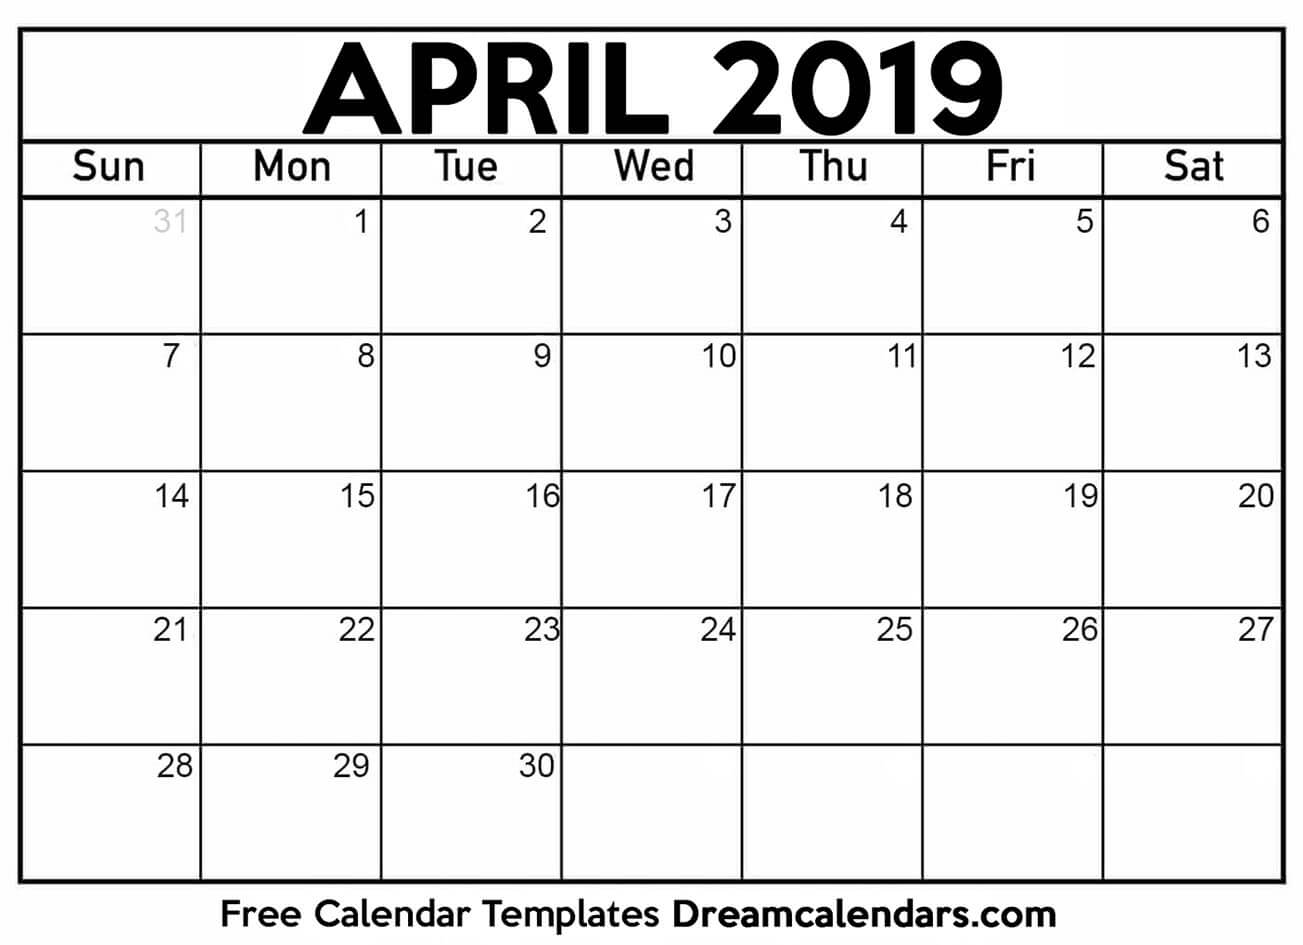 How to get a printed or printable calendar for April 2019 Quora